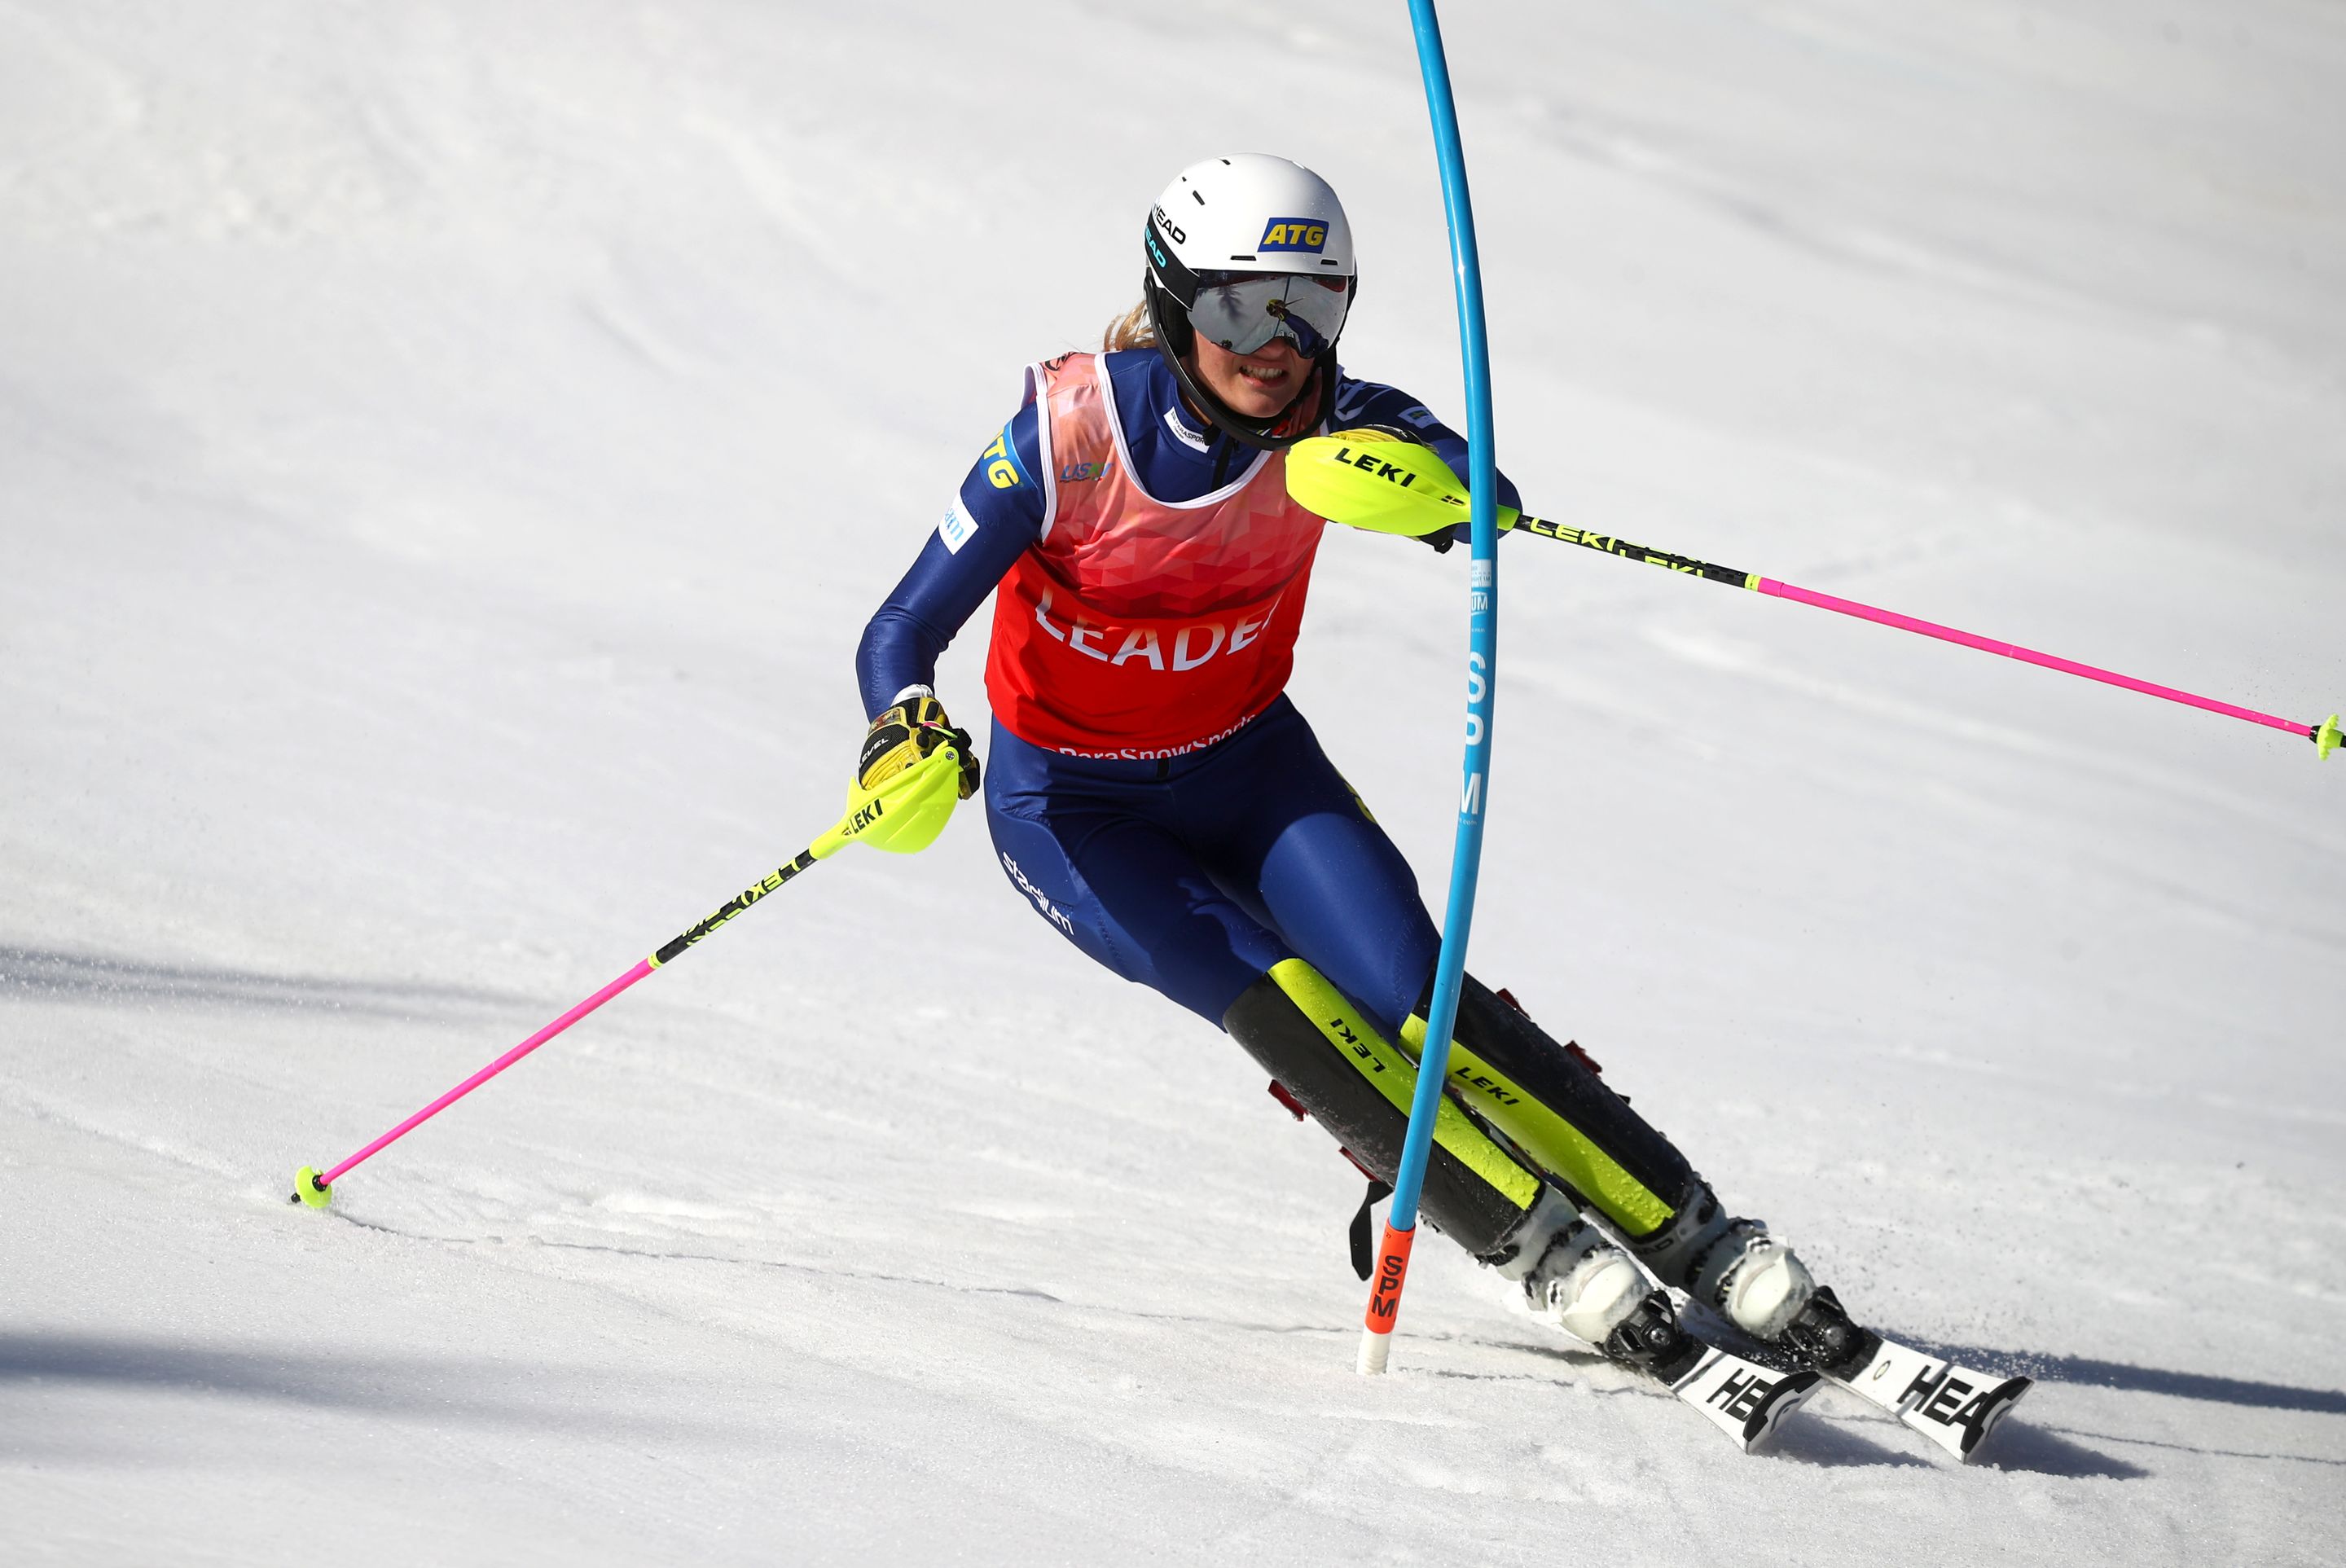 Ebba Aarsjoe (SWE) in action during the first run of the slalom in Sella Nevea